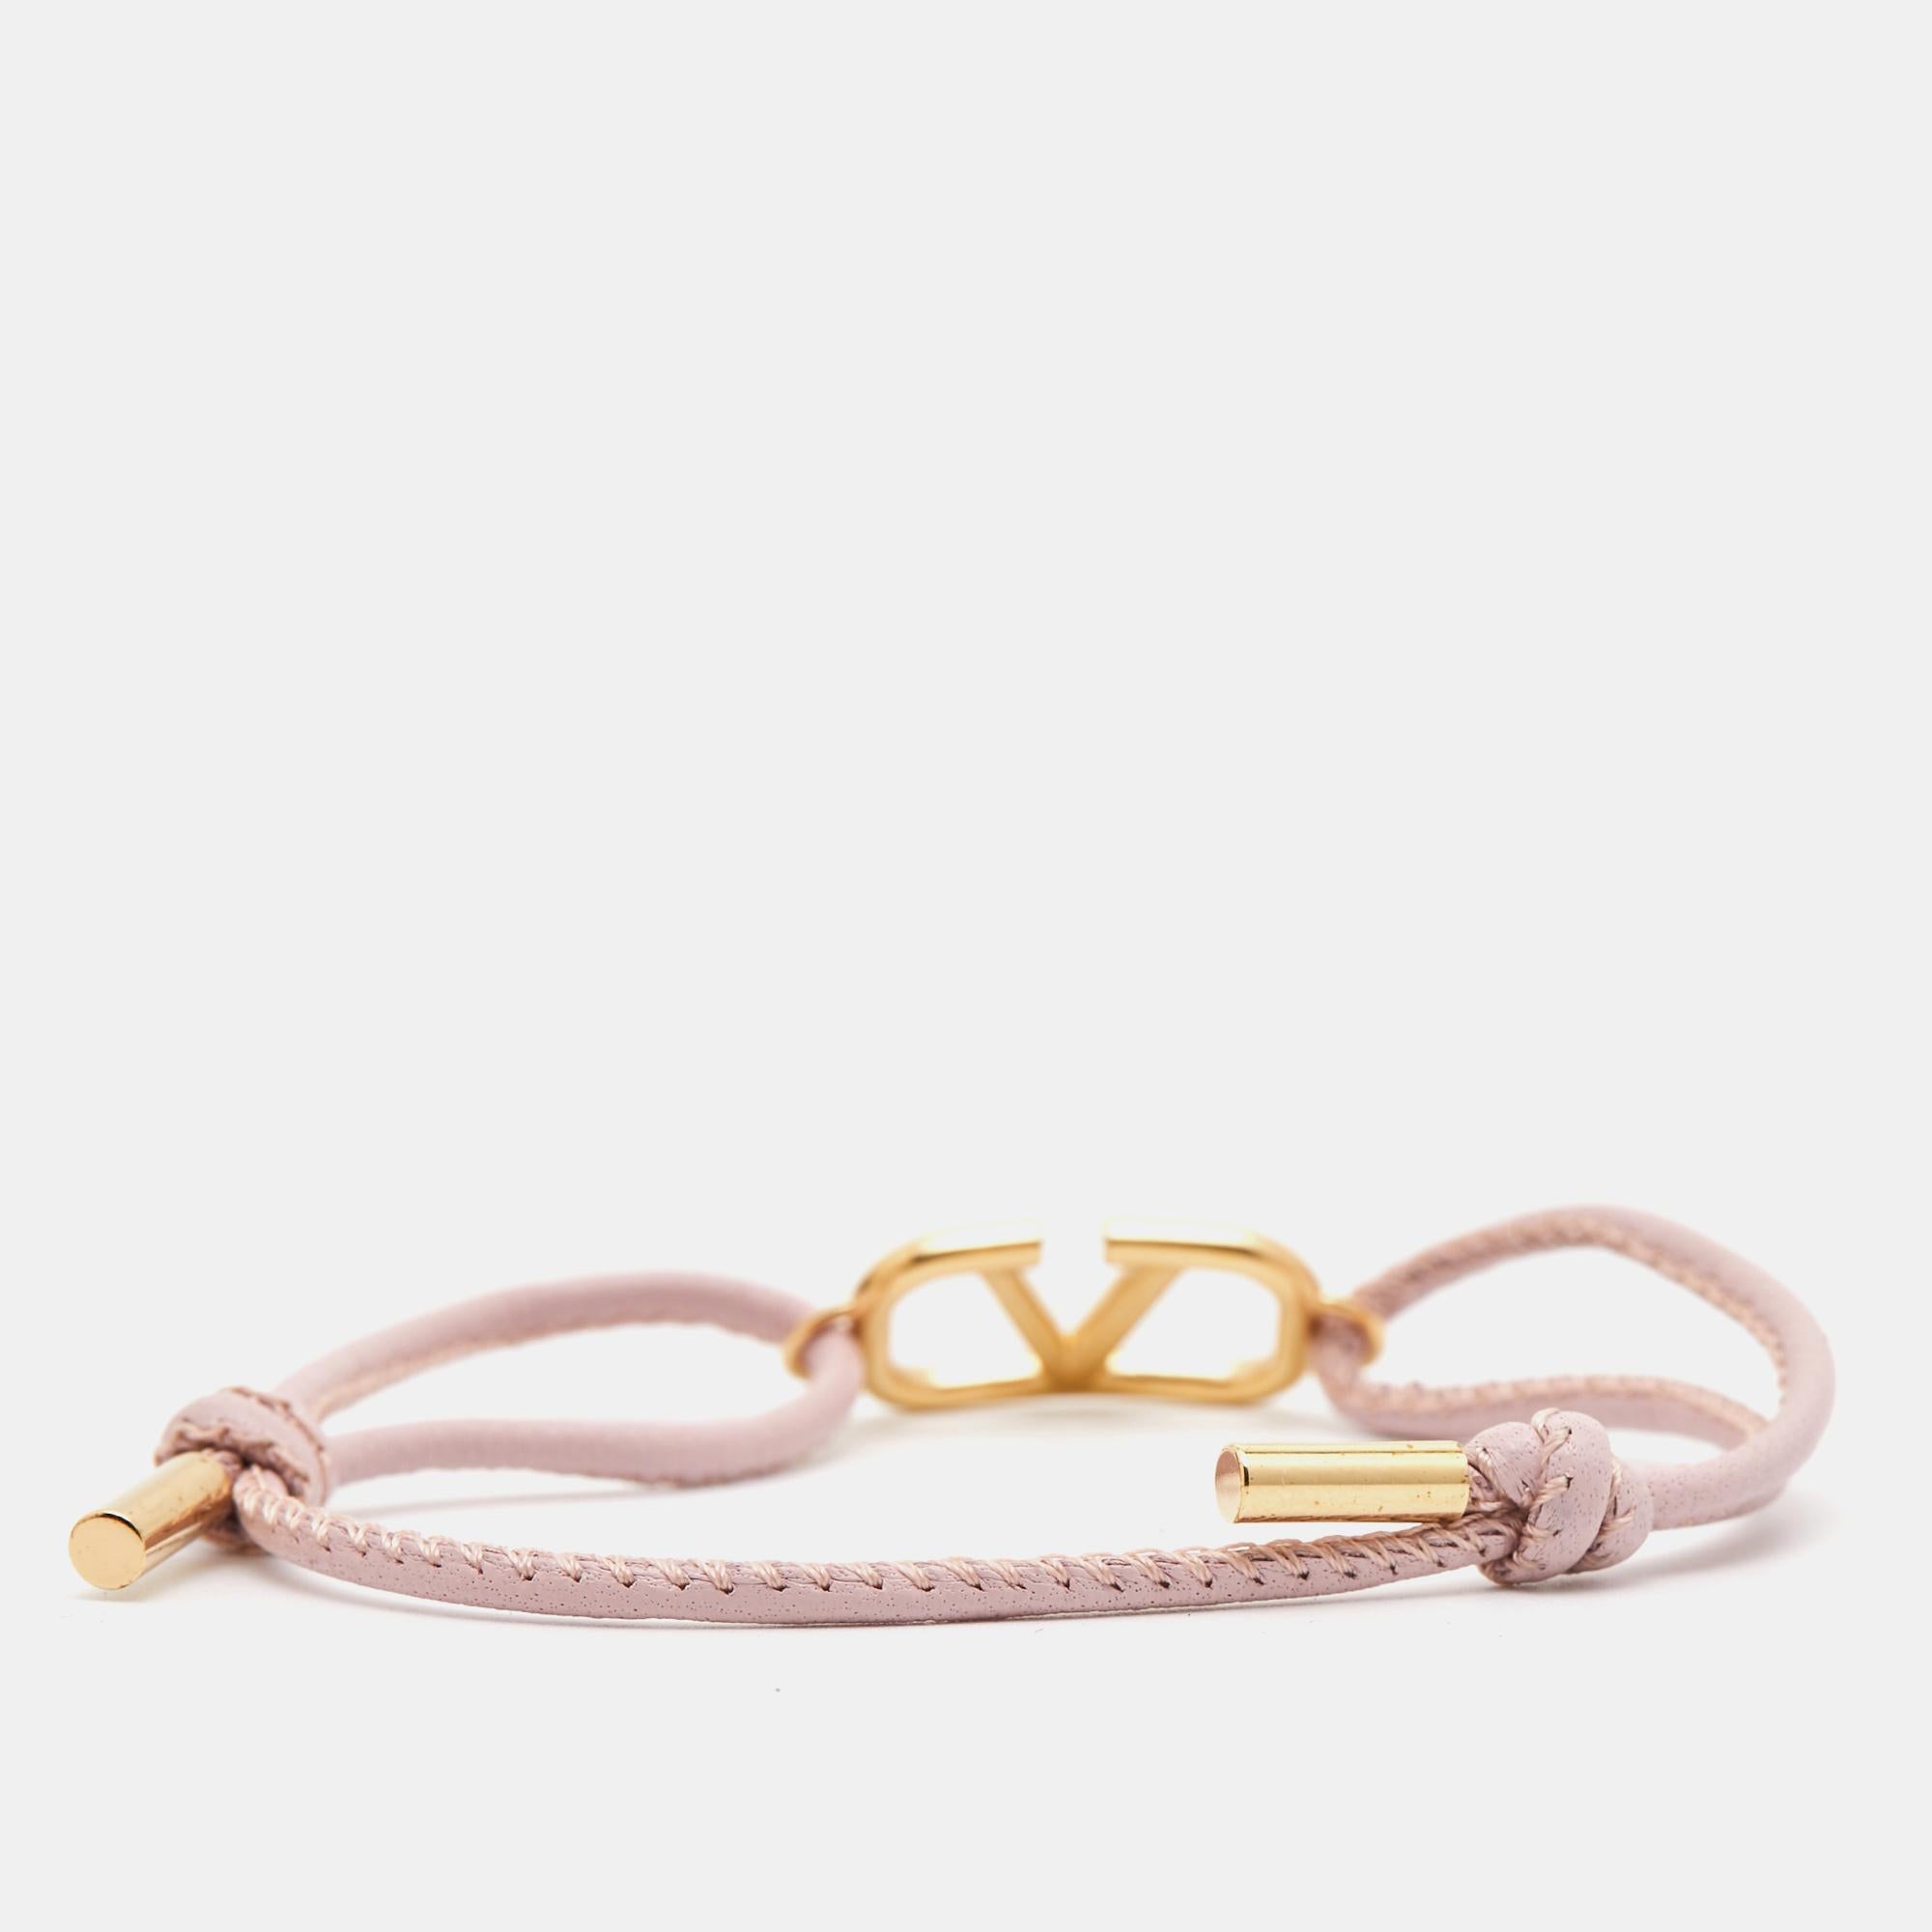 Add Valentino's magic to the way you accessorize with this bracelet. It has a simple leather string and the VLOGO in gold-tone metal.

